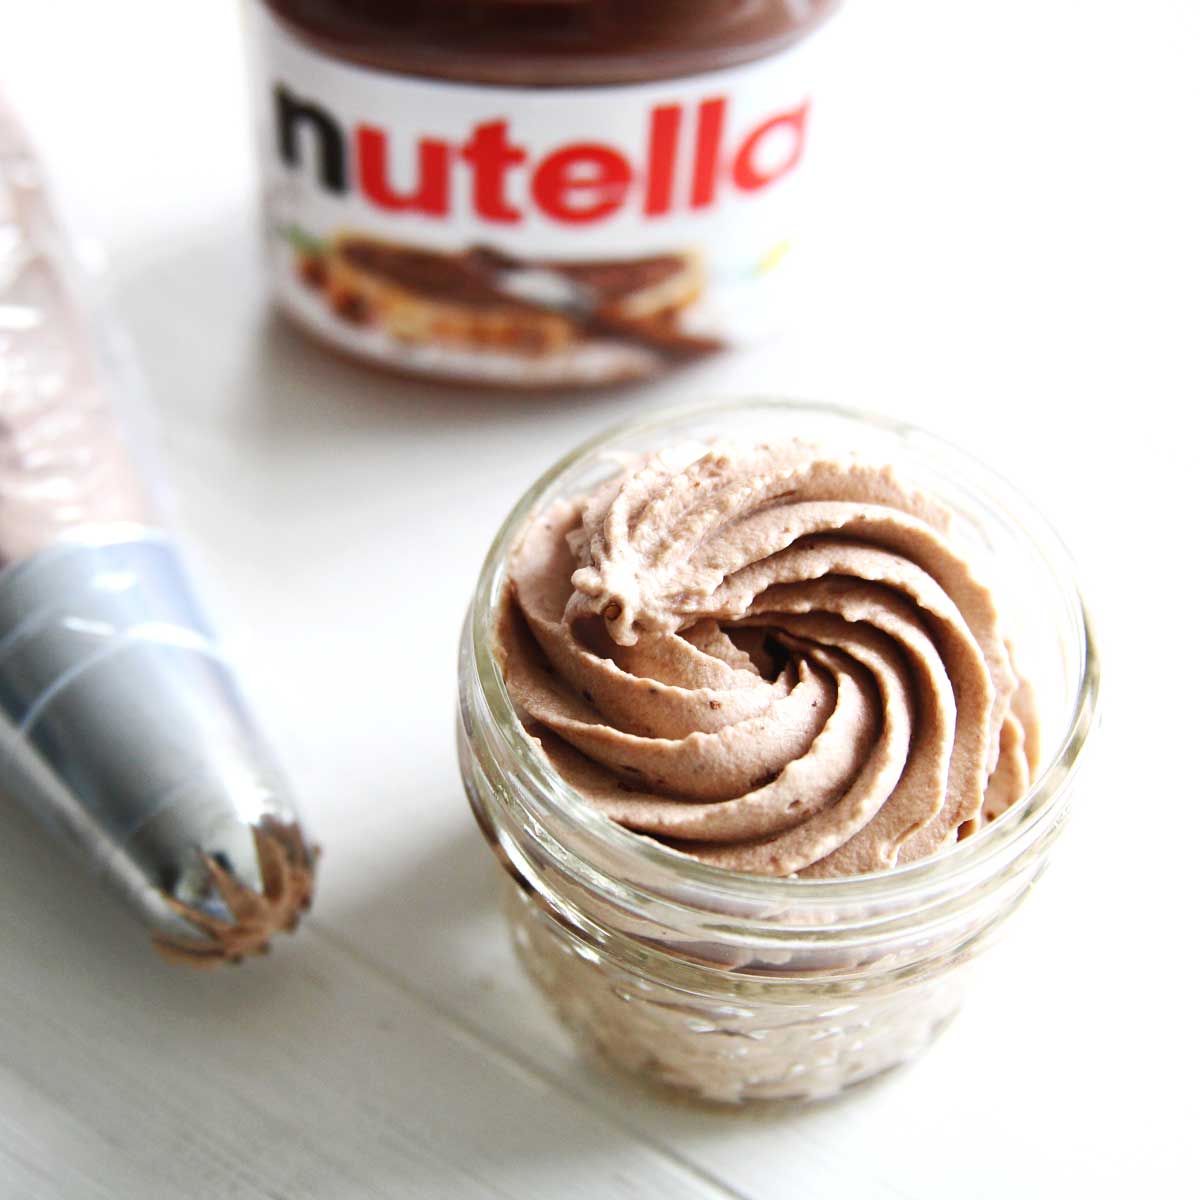 How to Make Nutella Chocolate Whipped Cream (Chantilly Cream) - swiss roll